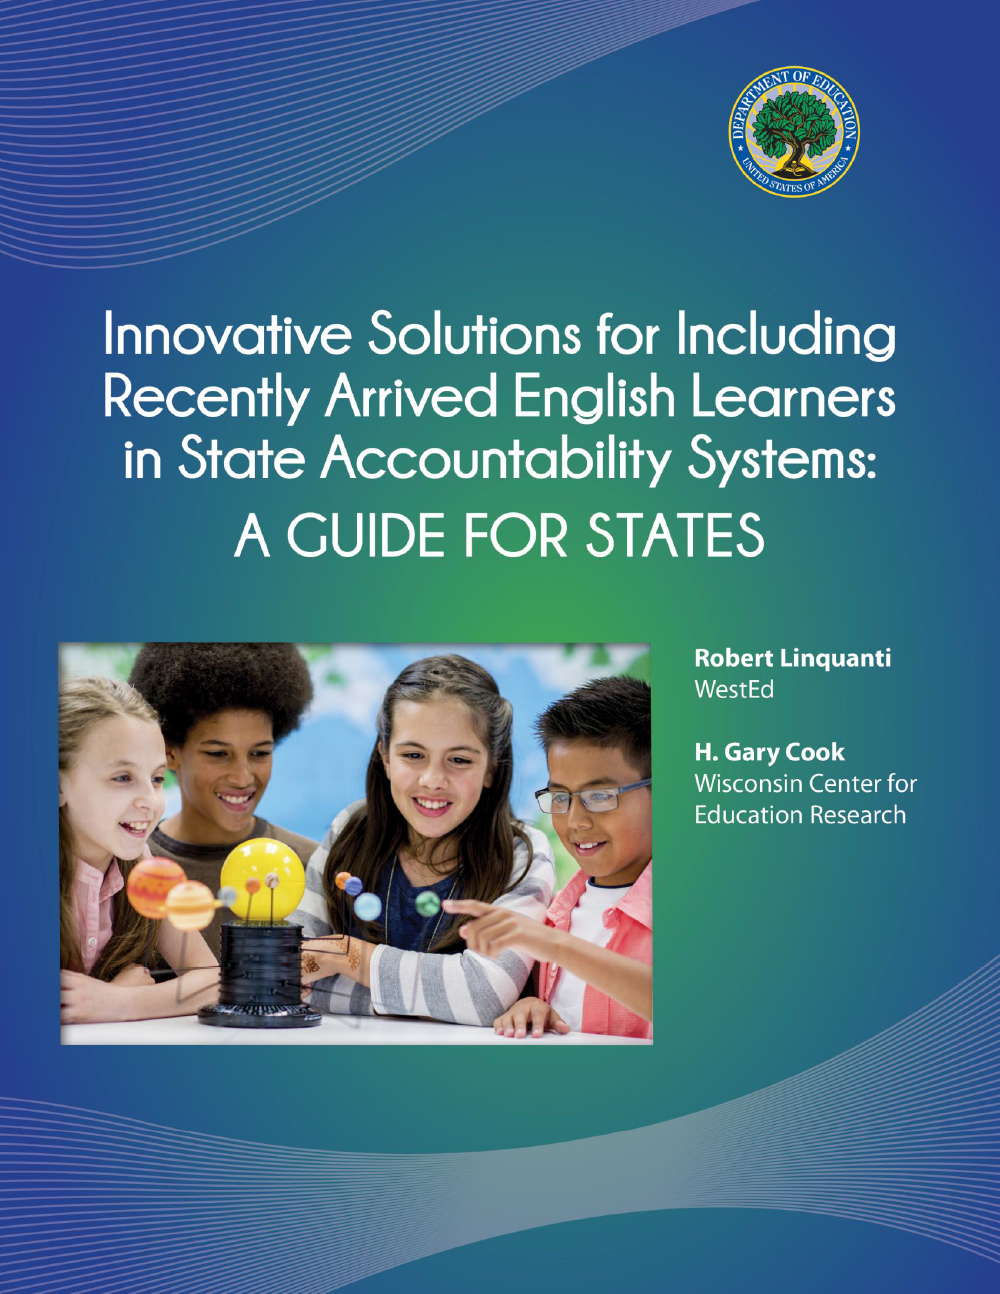 Innovative Solutions for Including Recently Arrived English Learners in State Accountability Systems: A Guide for States